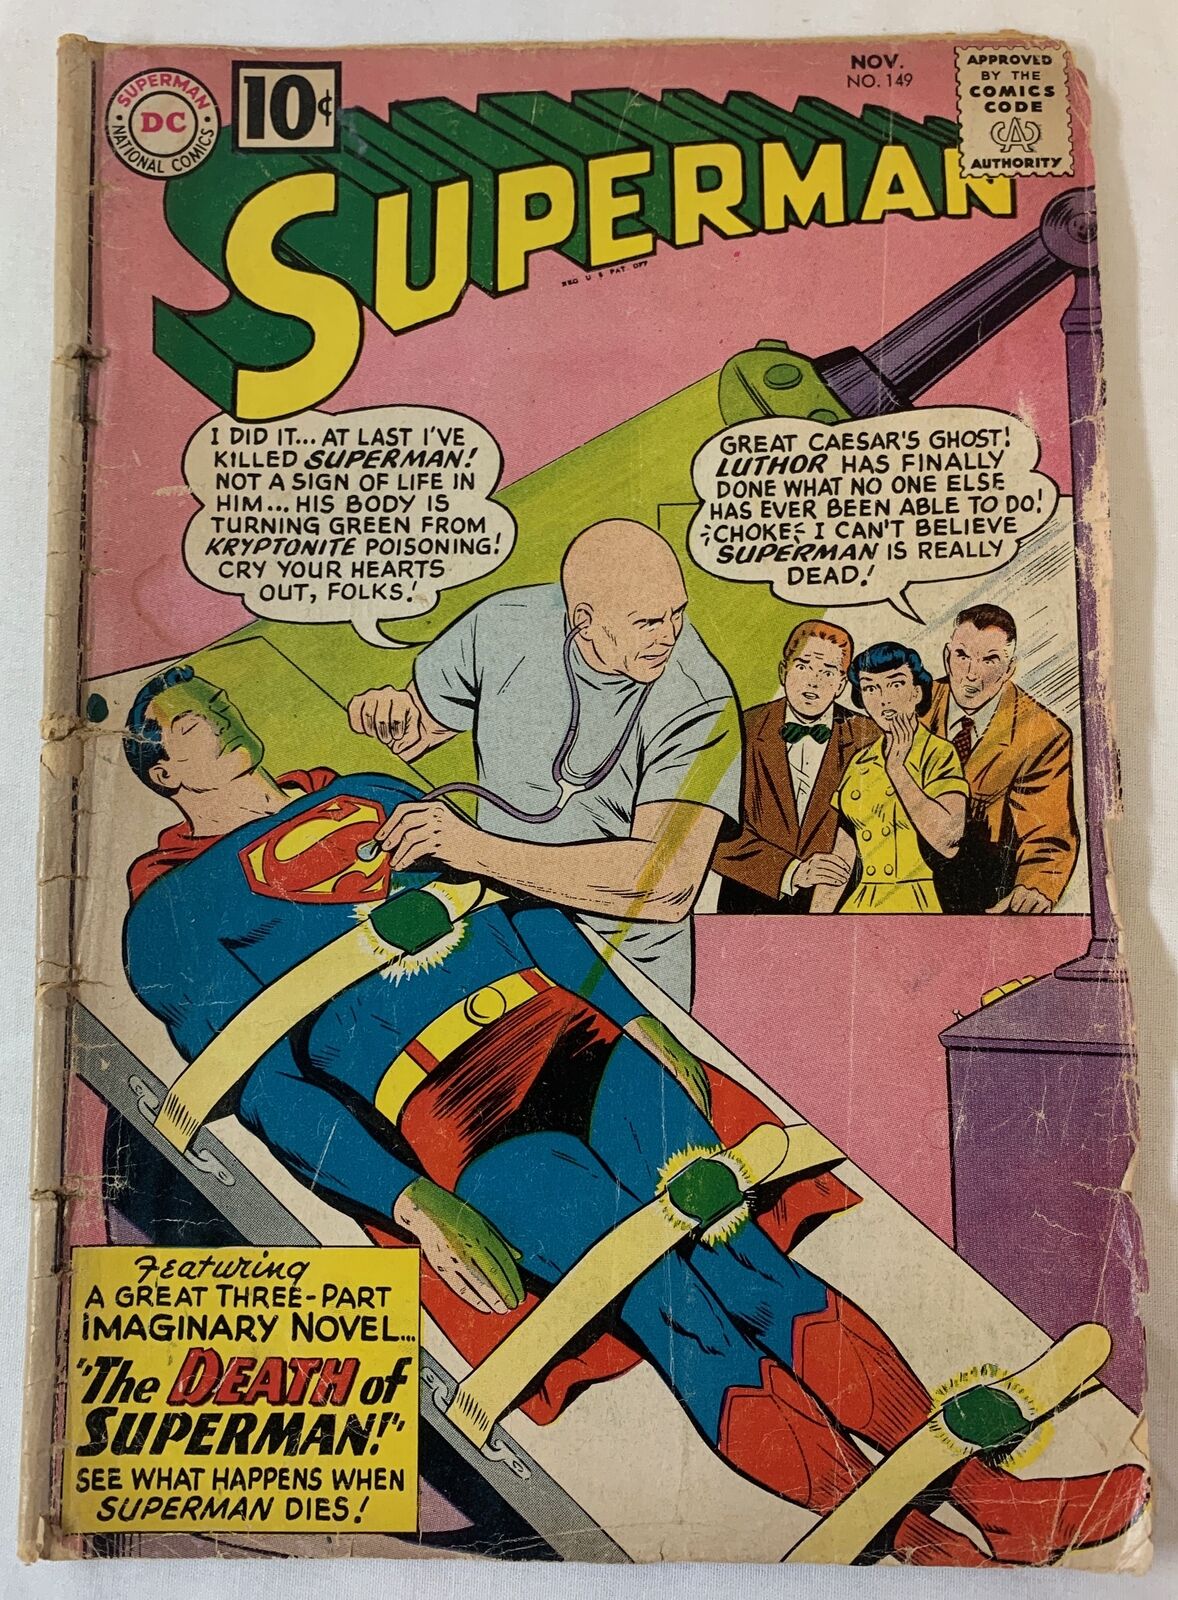 1961 DC Comics SUPERMAN #149 ~ low grade, centerfold detached and tattered